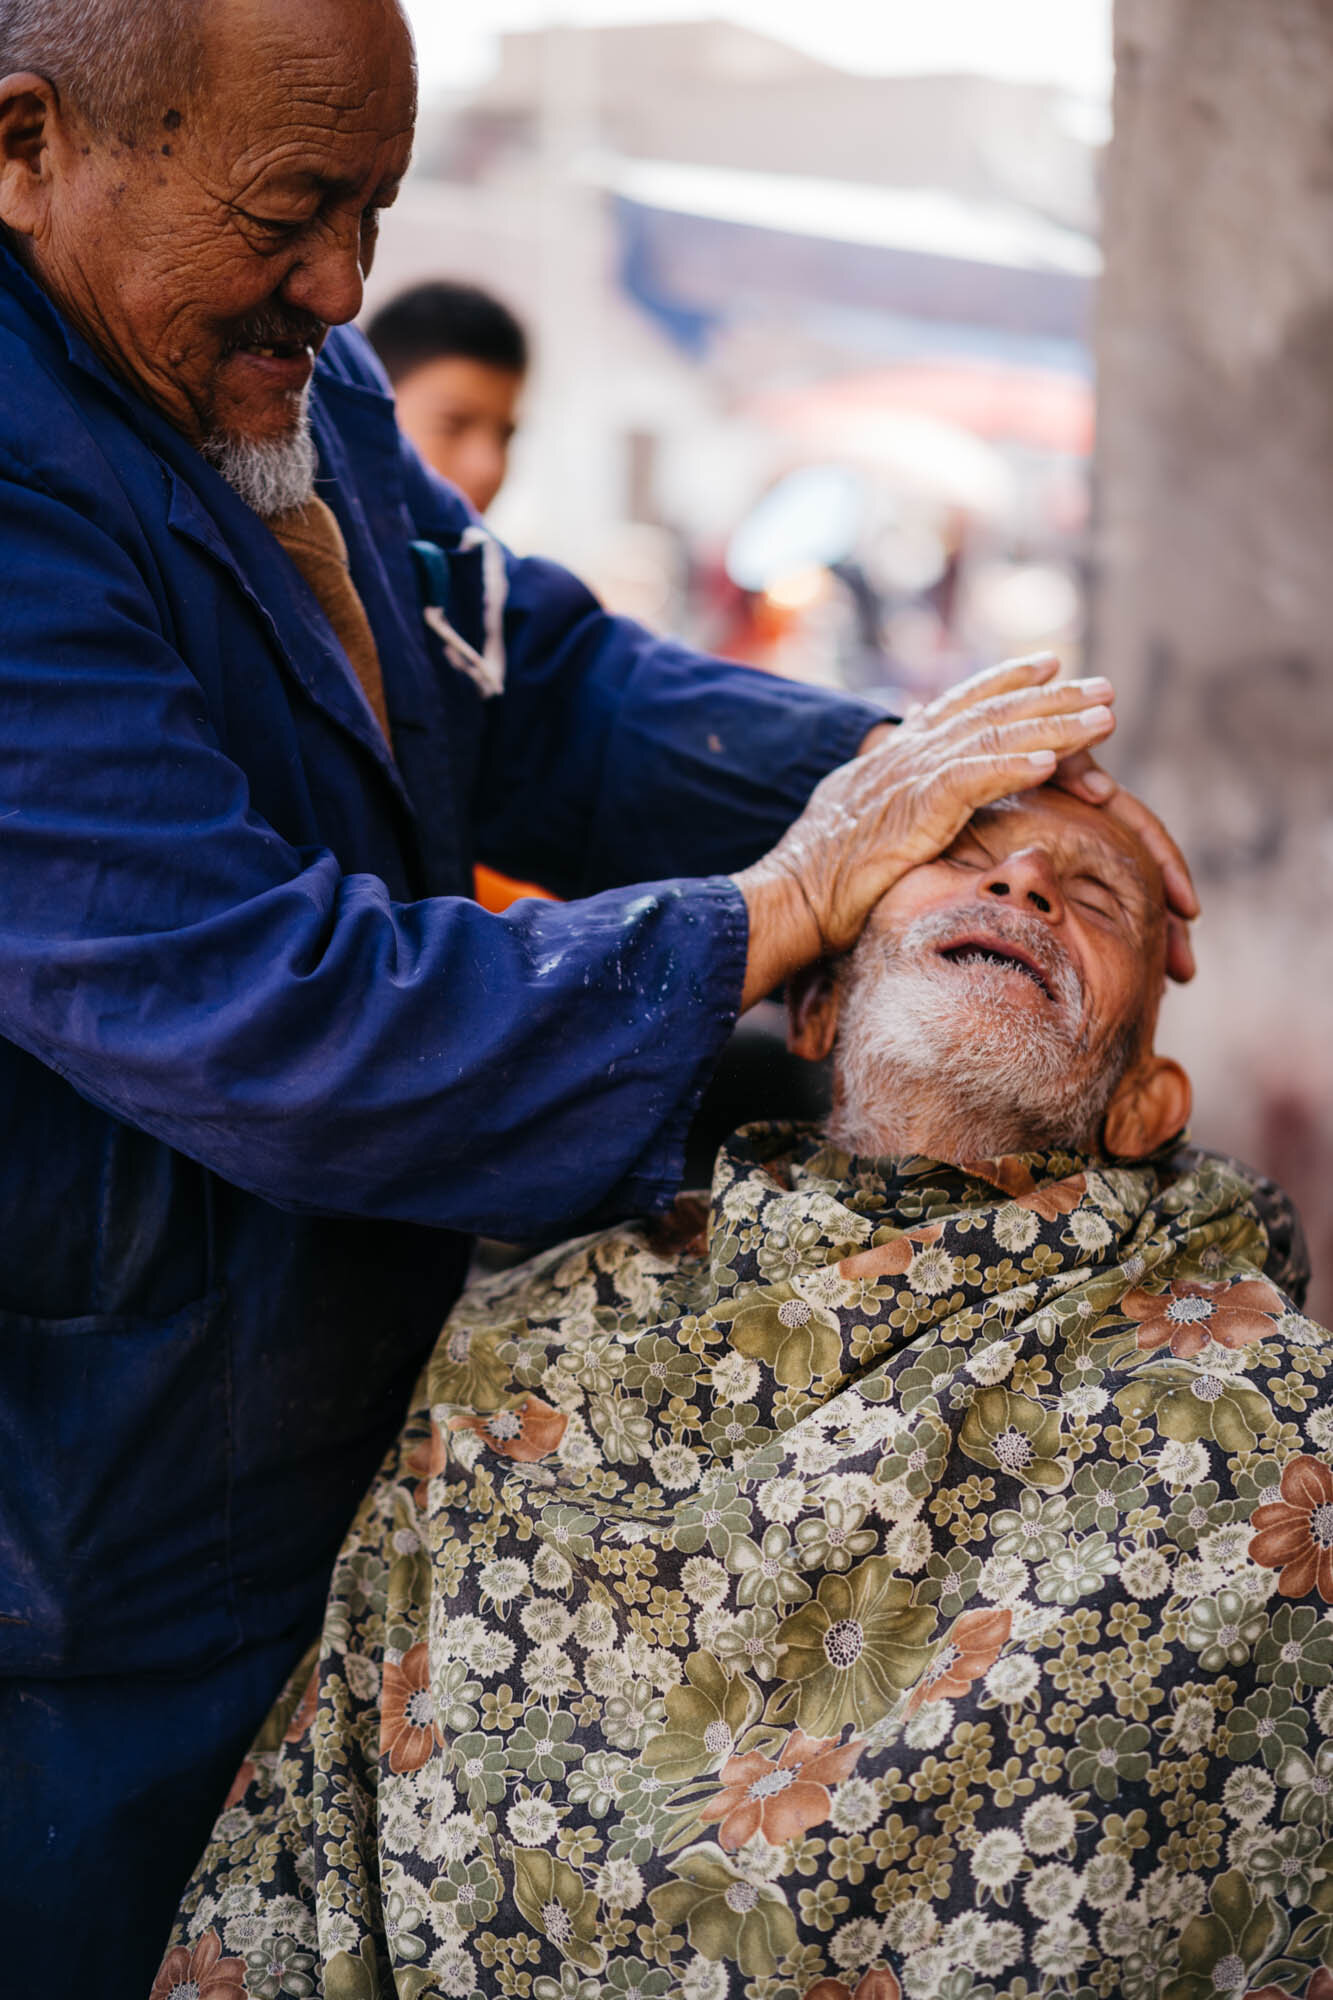  A barber giving face massage at the bazaar 